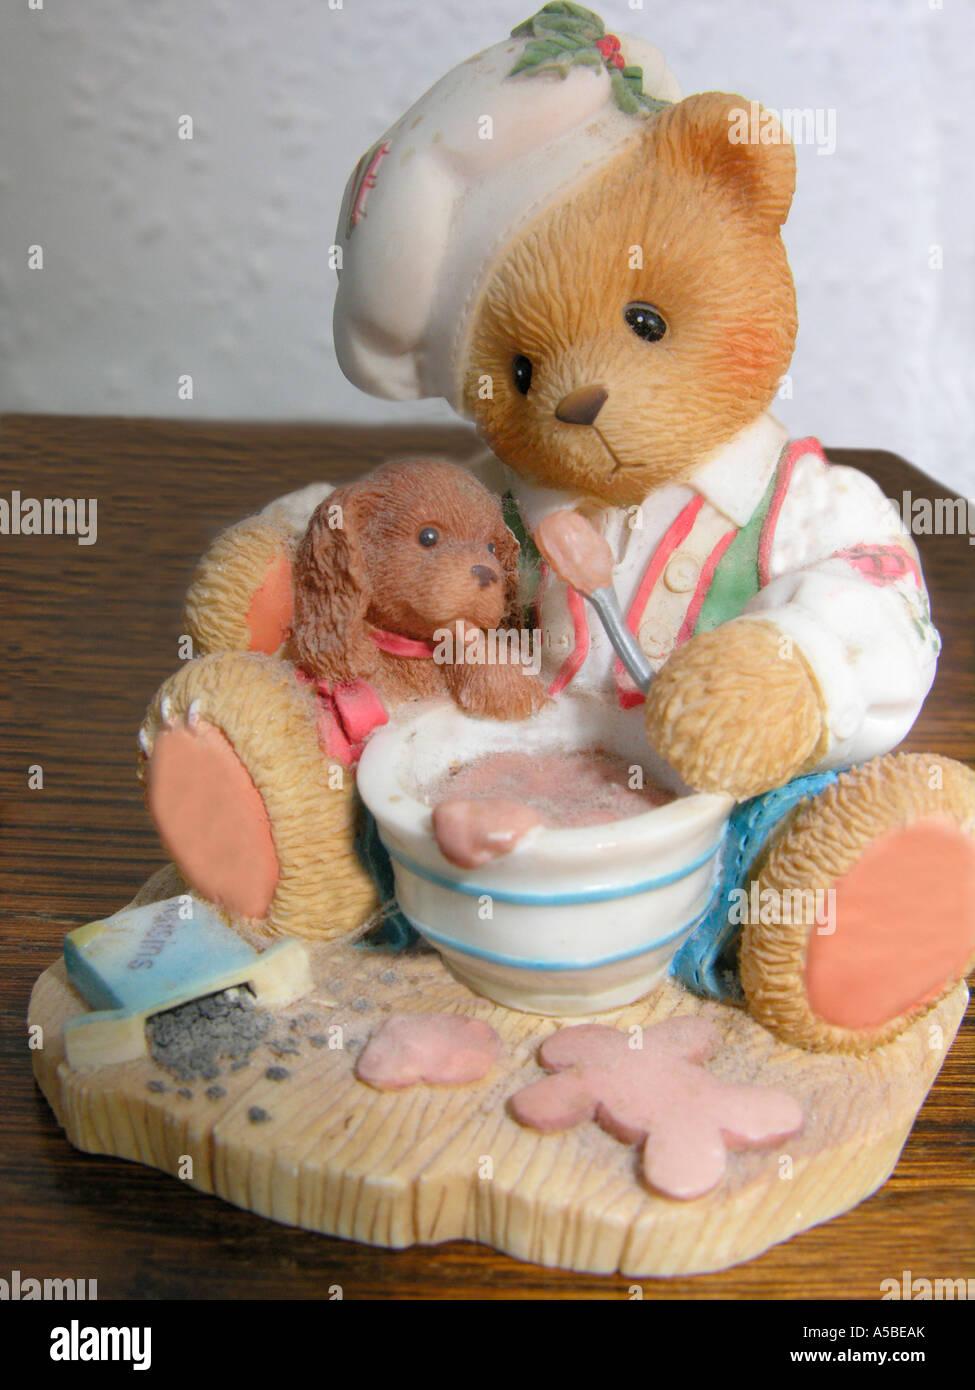 cute teddy bear and dog figurines with a Christmas theme mixing up a cake Stock Photo